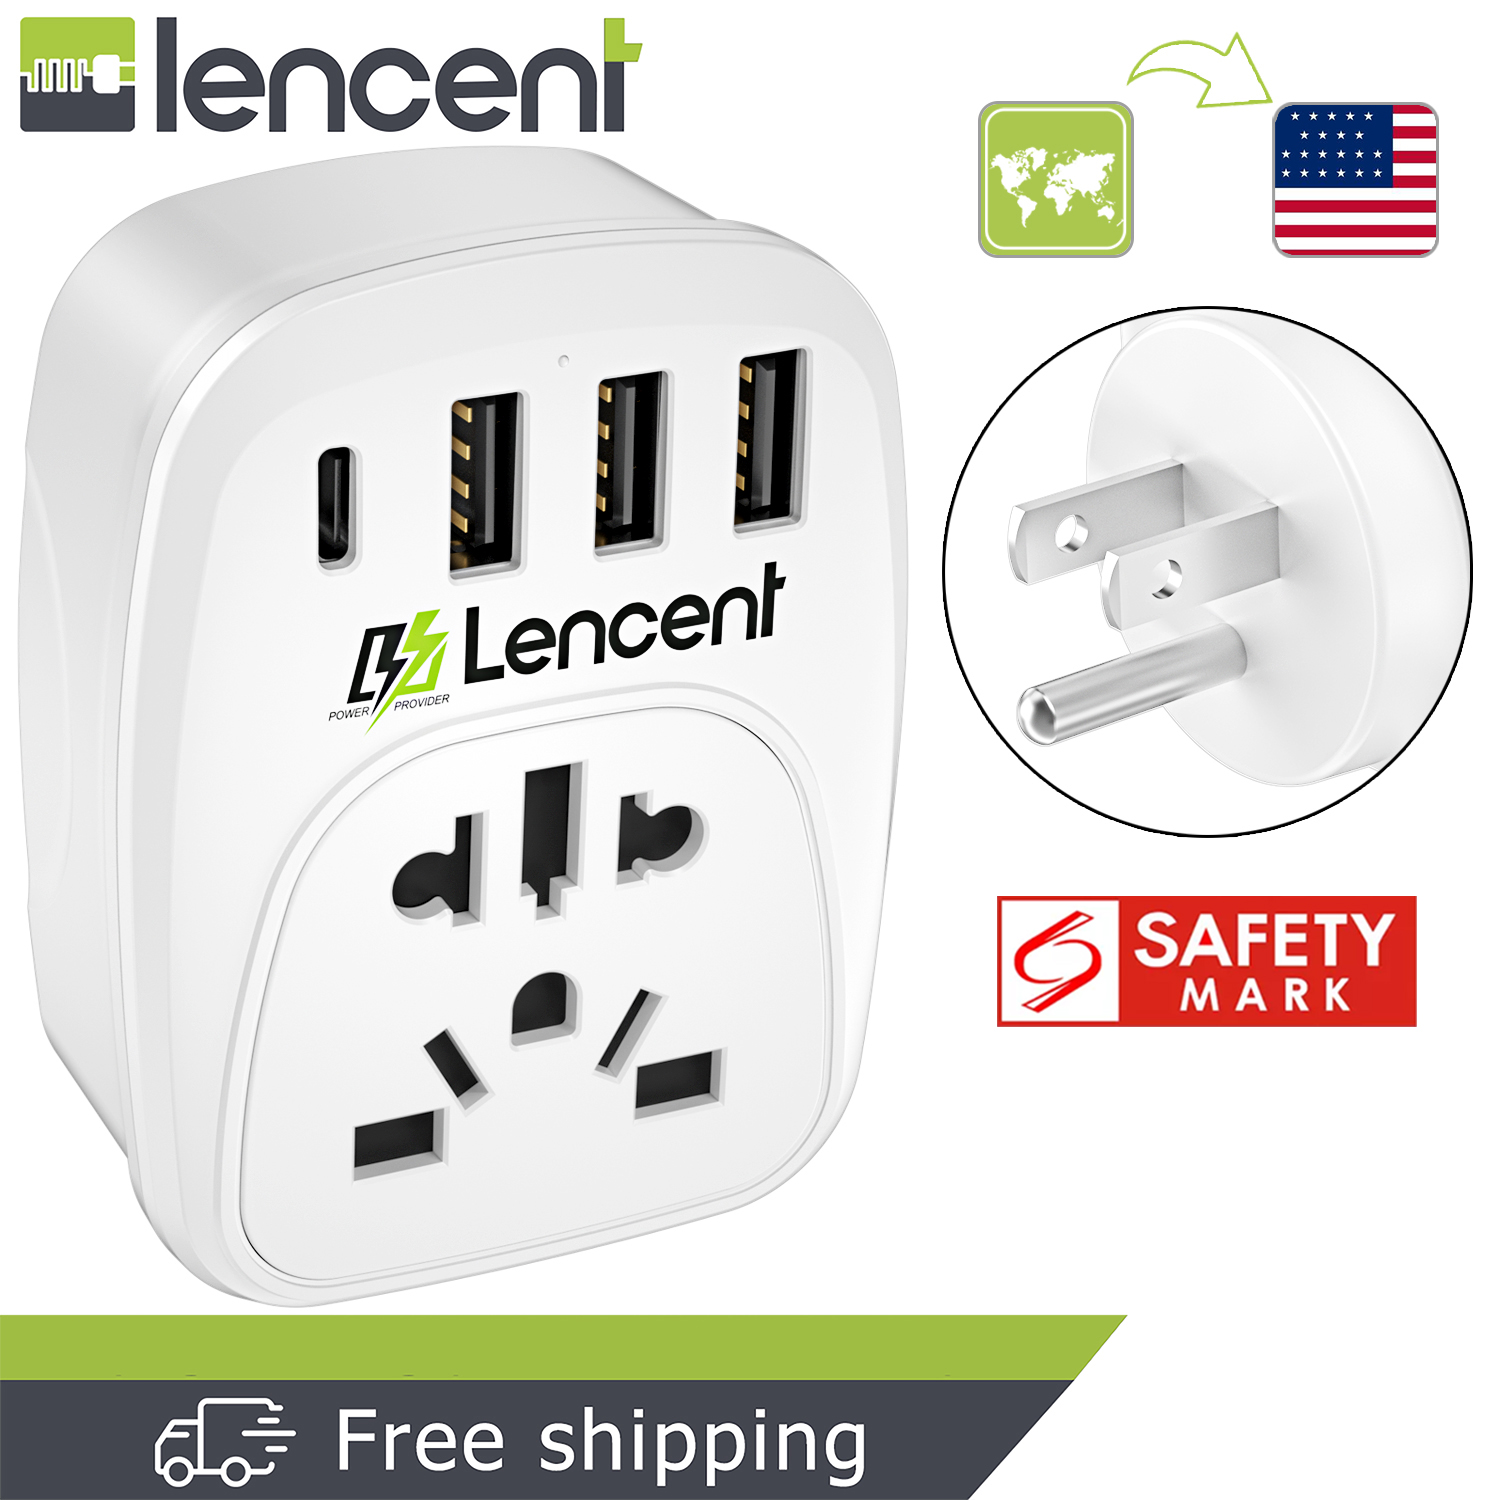 European Travel Plug Adapter International Power Adaptor 3 in 1 EU Plug Adapter Charger AC American Outlets and Dual USB Ports Conversion Plug for US to Most of Europe Italy Spain 